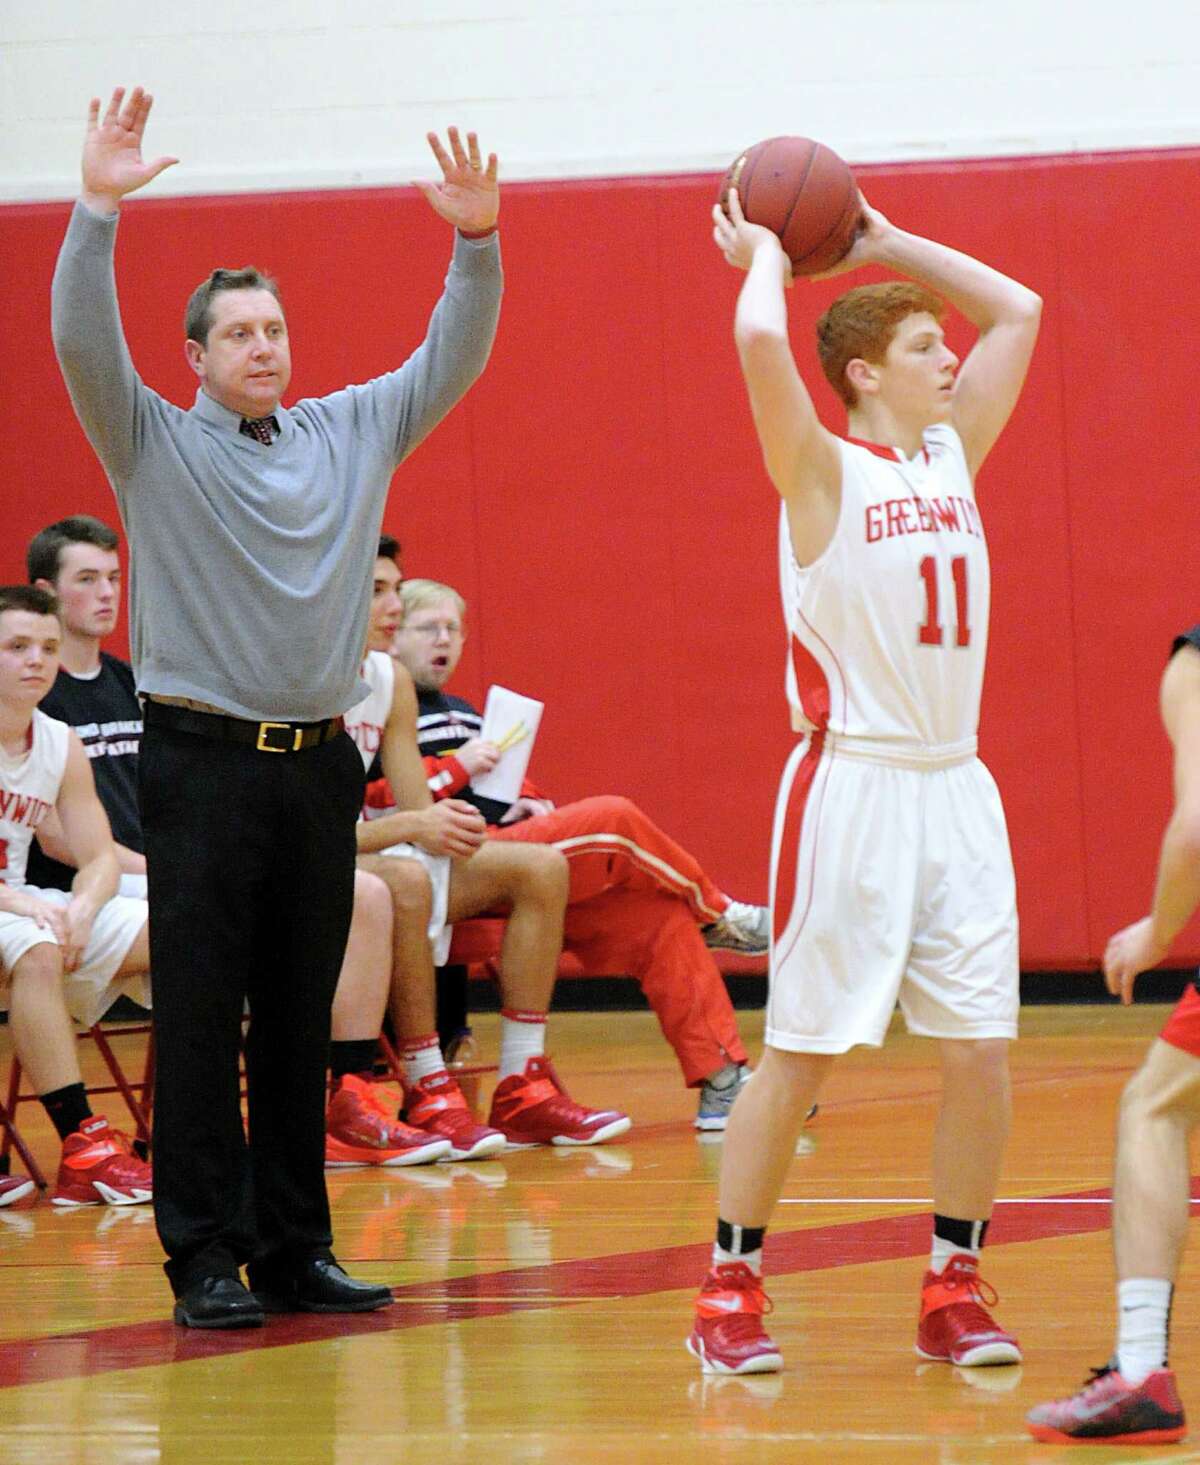 At left, Greenwich High School boys basketball coach Pat Heaton gestures as Greenwich player Henry Golden(#11) looks to pass during the boys basketball game between Greenwich High School and Fairfield Warde High School at Greenwich, Conn., Thursday night, Jan. 22, 2015.